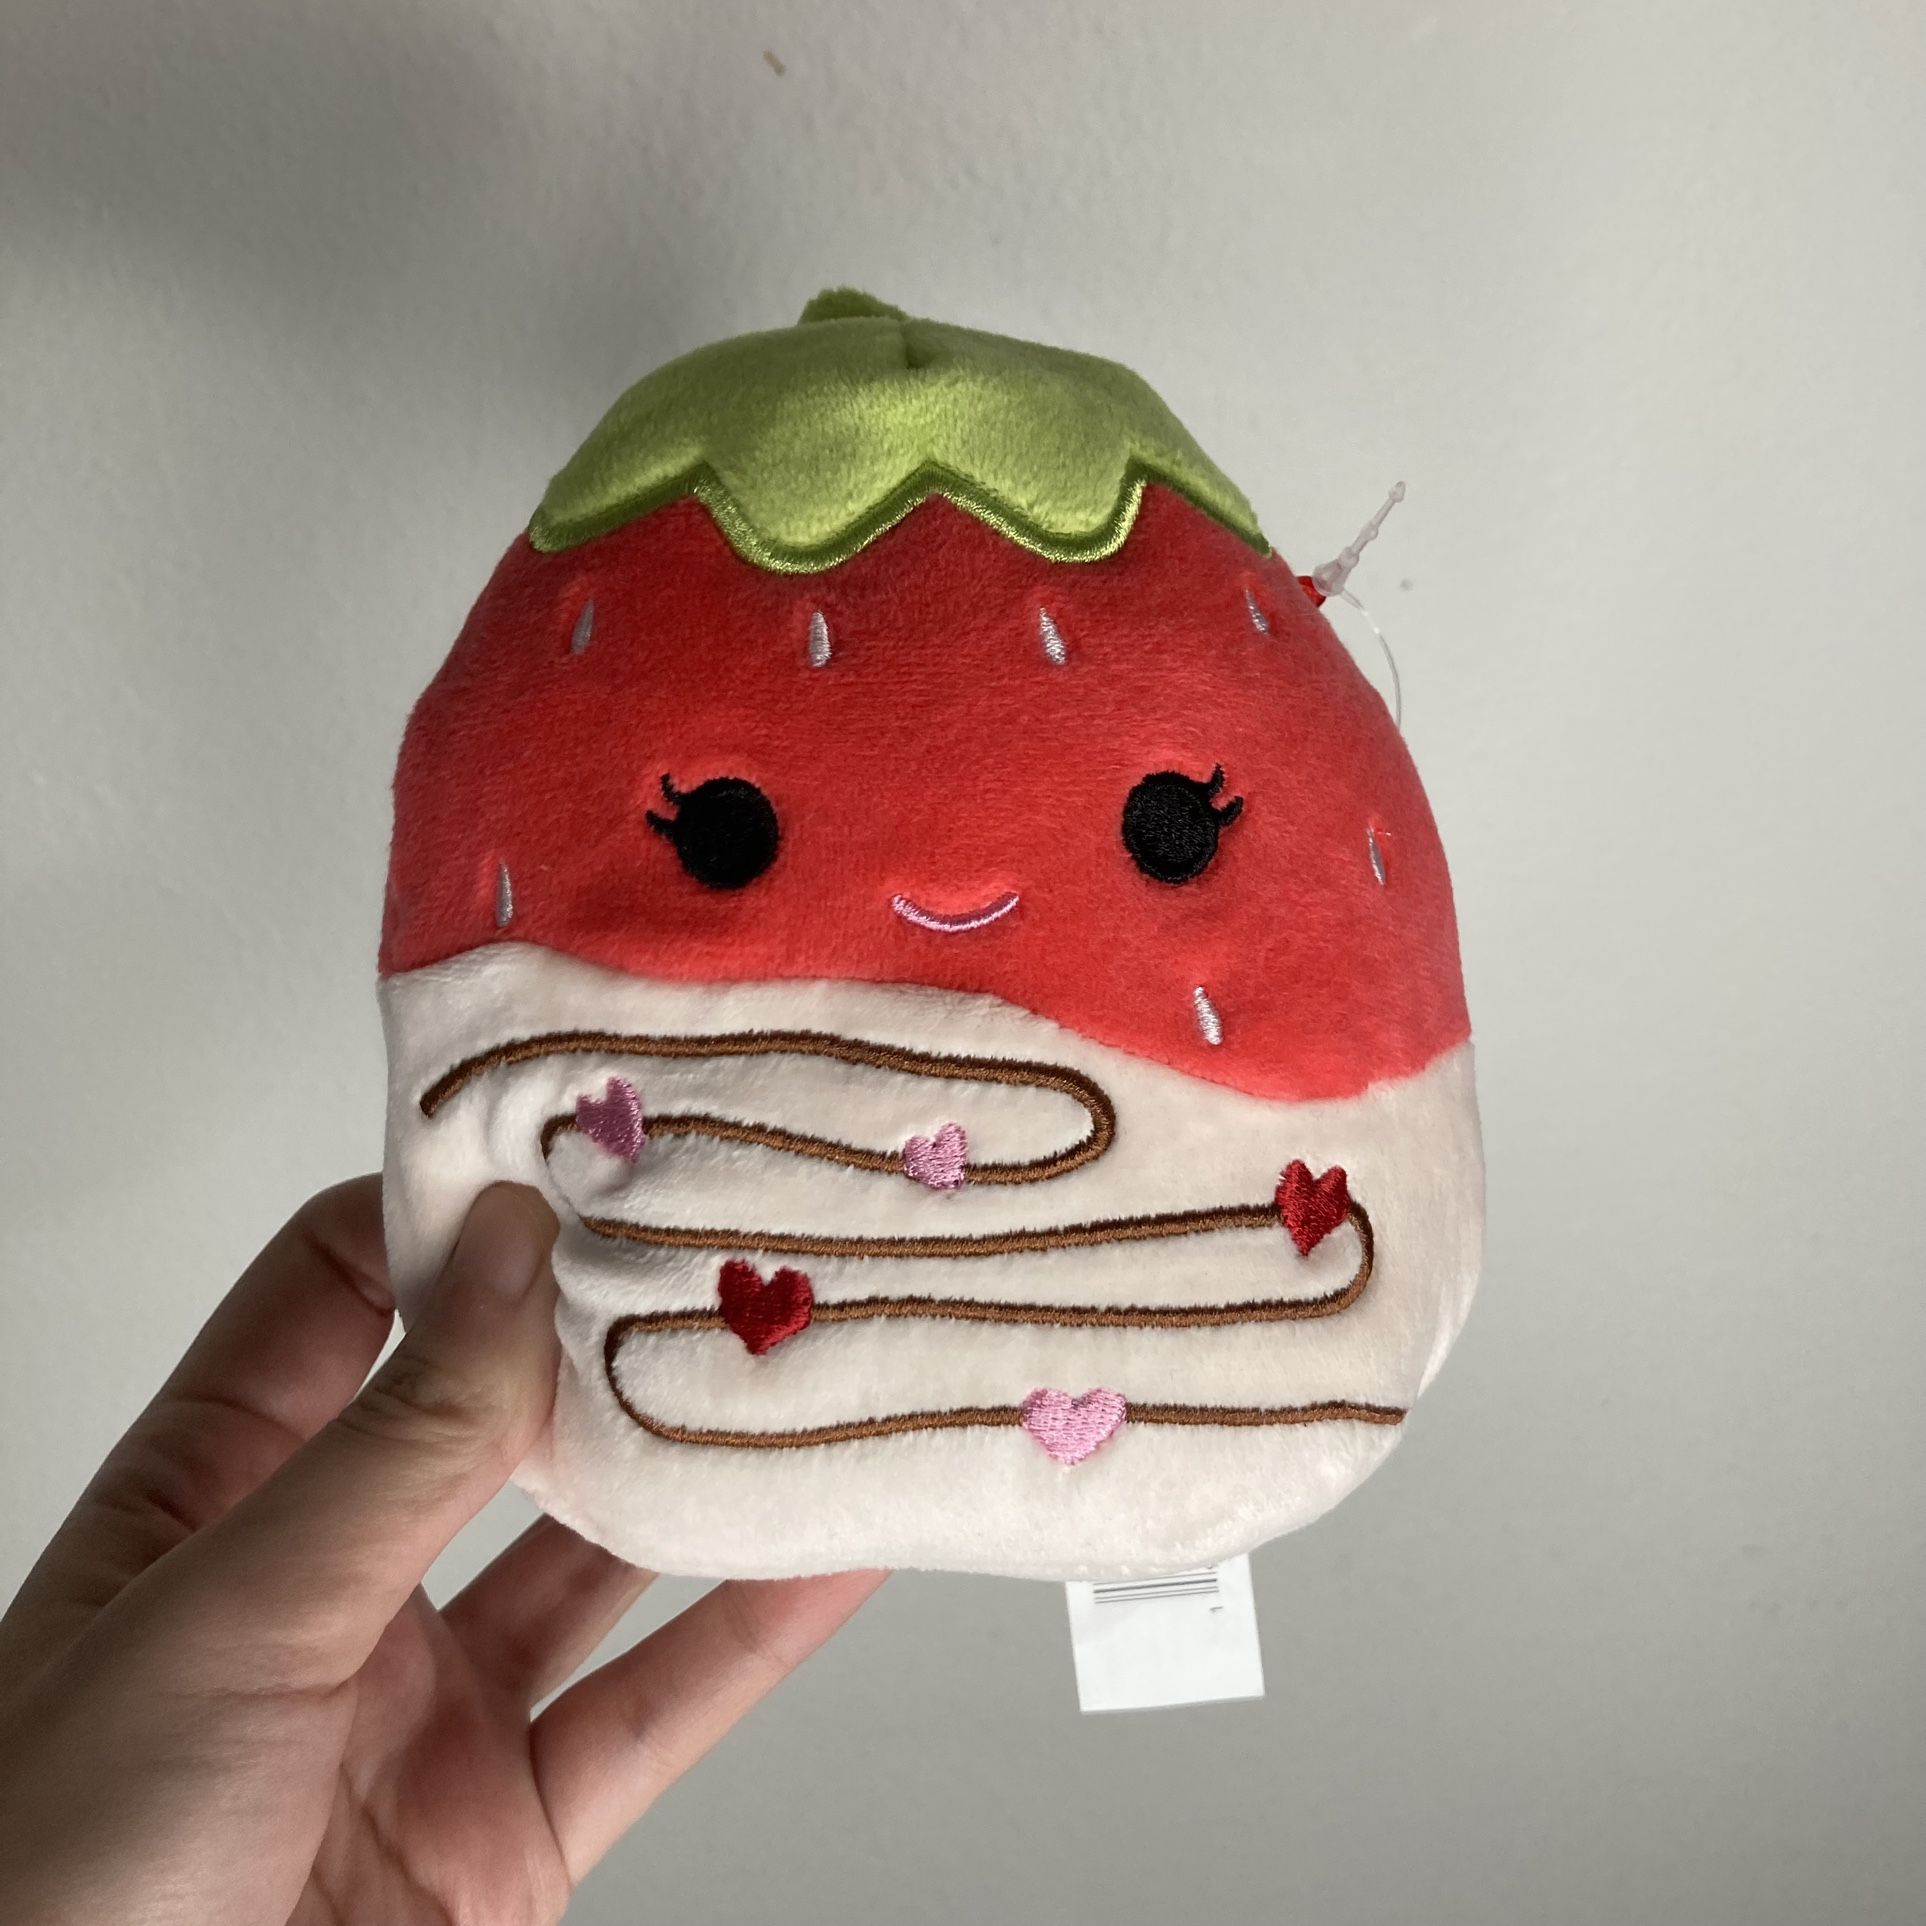 Scarlet The Chocolate Strawberry 5” Valentines Squishmallow Plushie